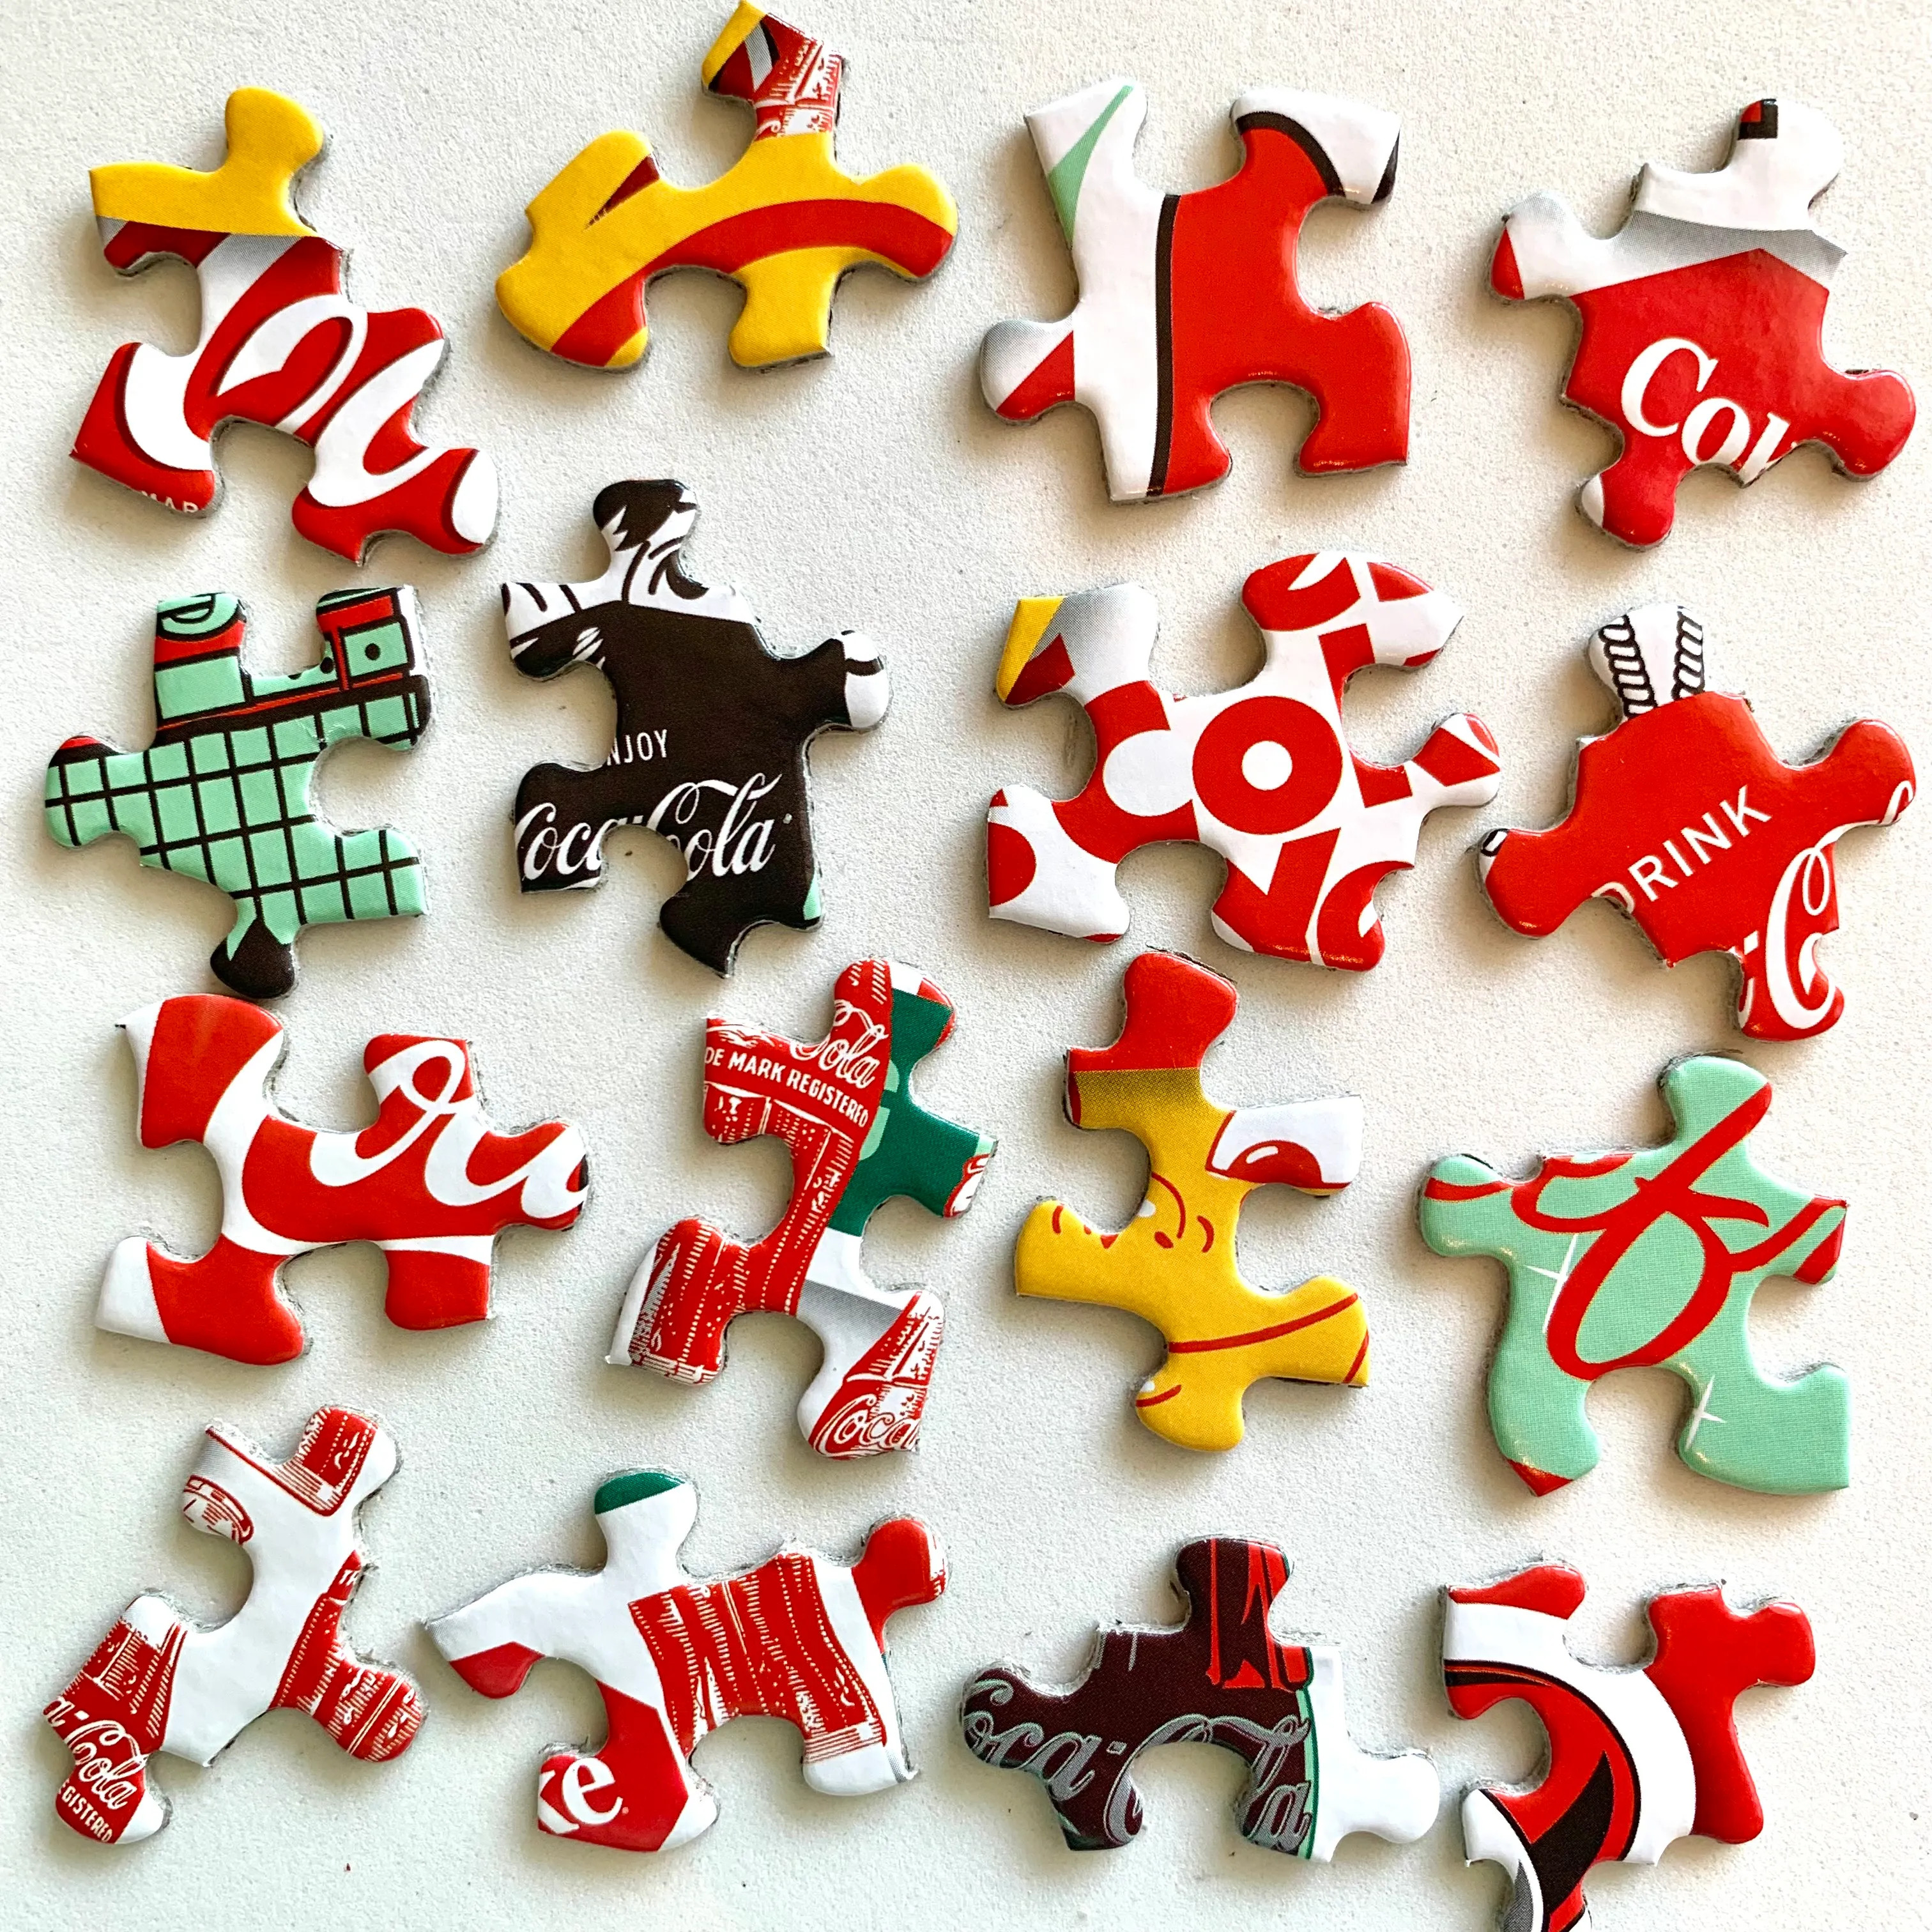 You Bet it's Delicious - Coca Cola Jigsaw Puzzle by Georgia Clare -  Instaprints